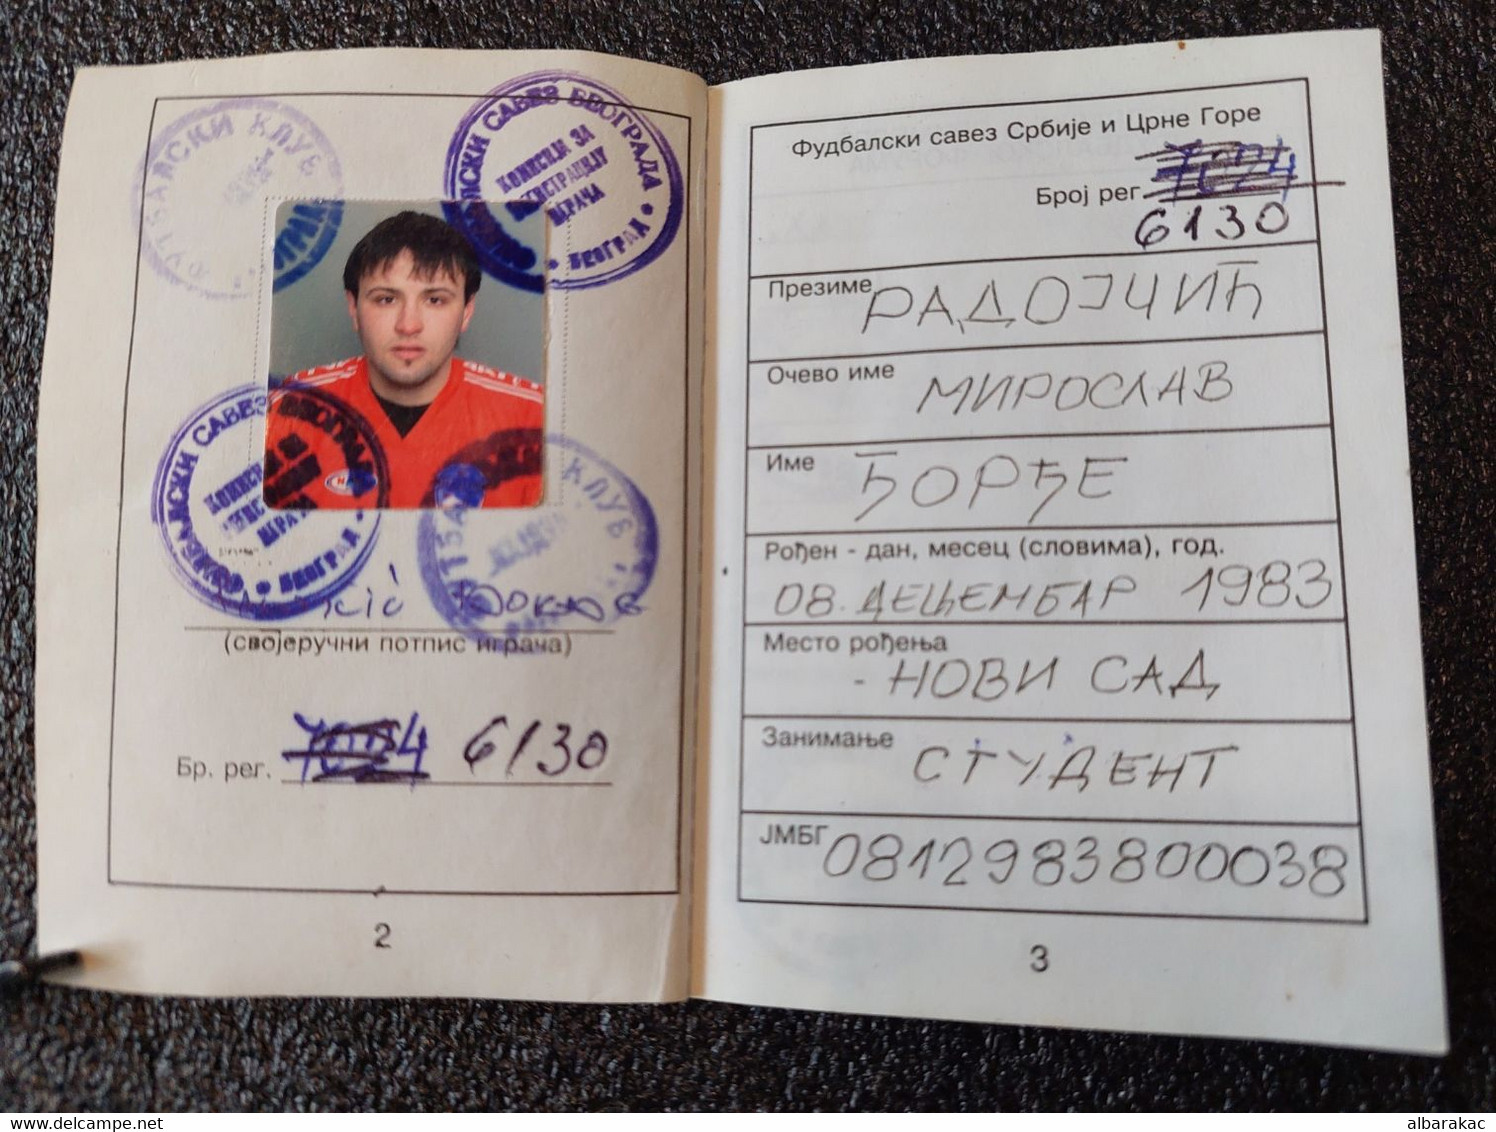 Football Soccer Union SCG Serbia , Beograd - ID Card With Additional Stamp 2007 , And Photo - Habillement, Souvenirs & Autres